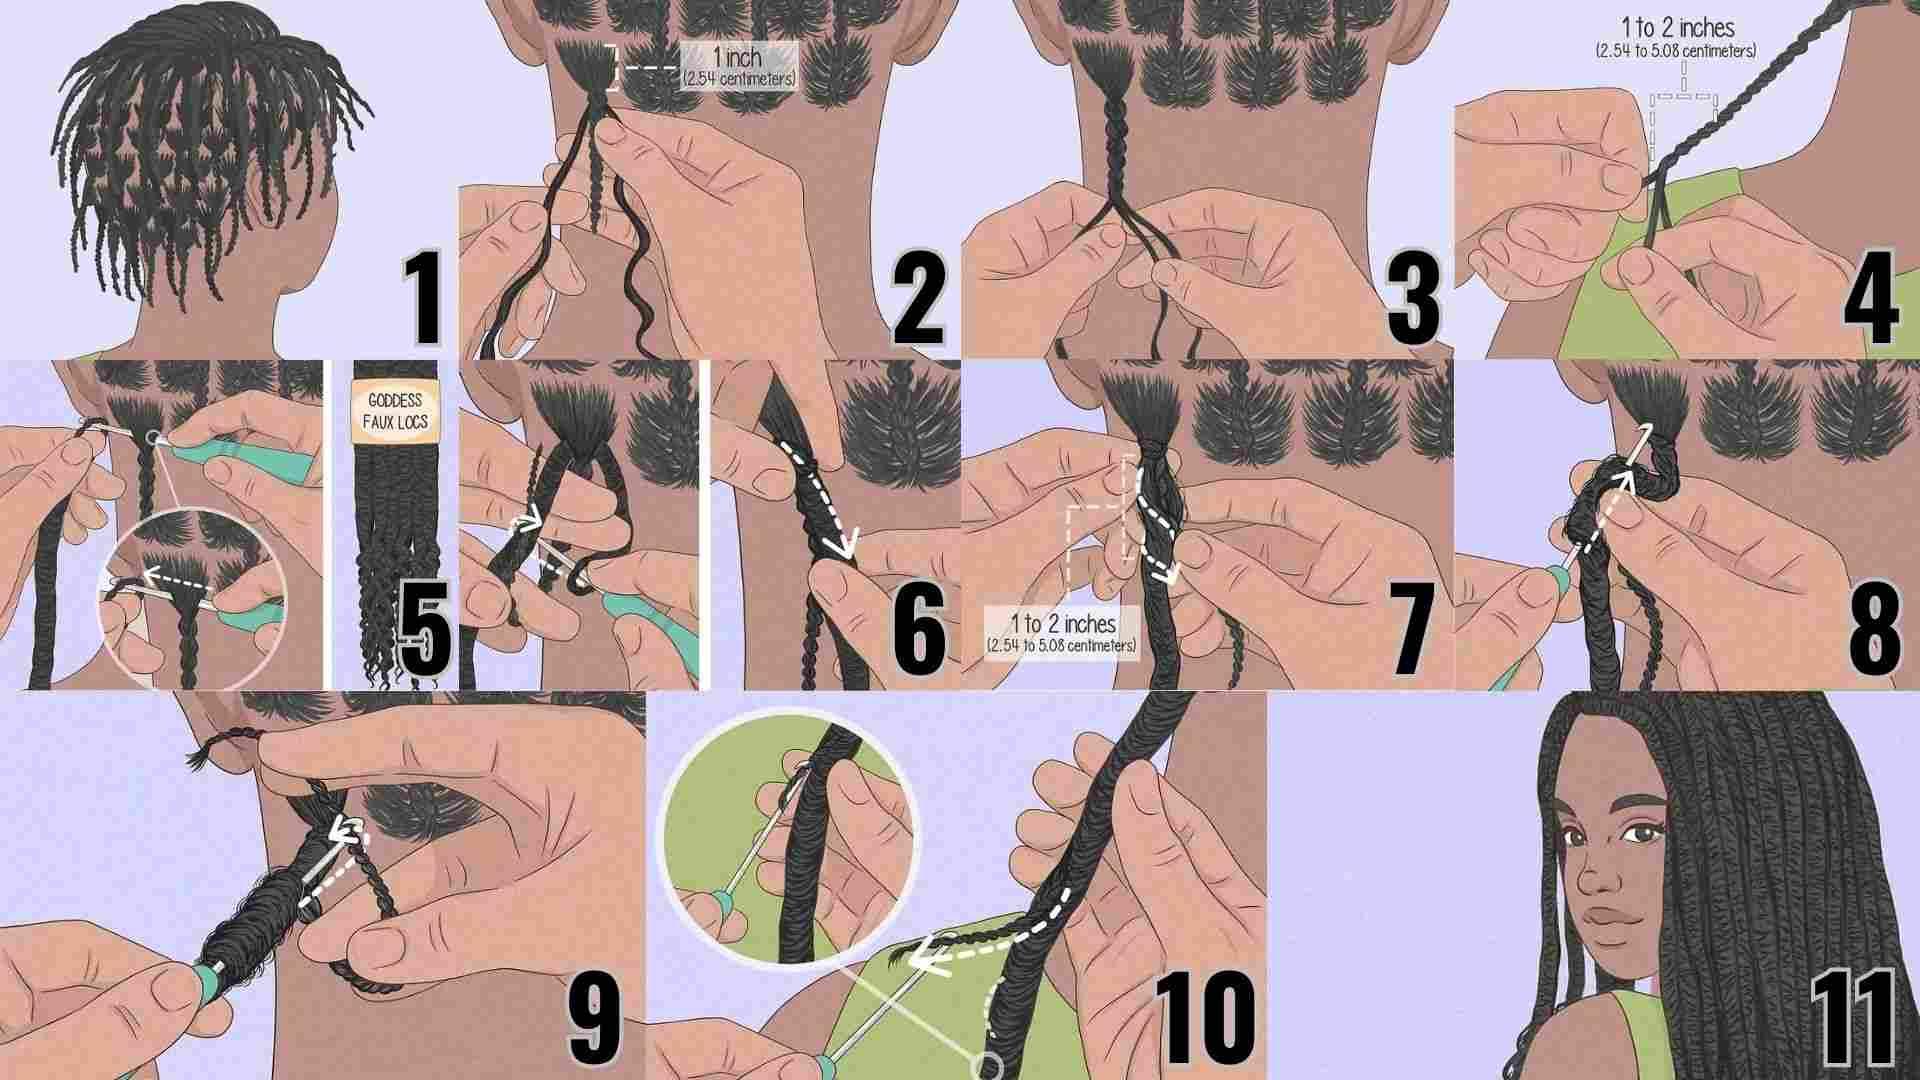 The process of creating Faux Locs